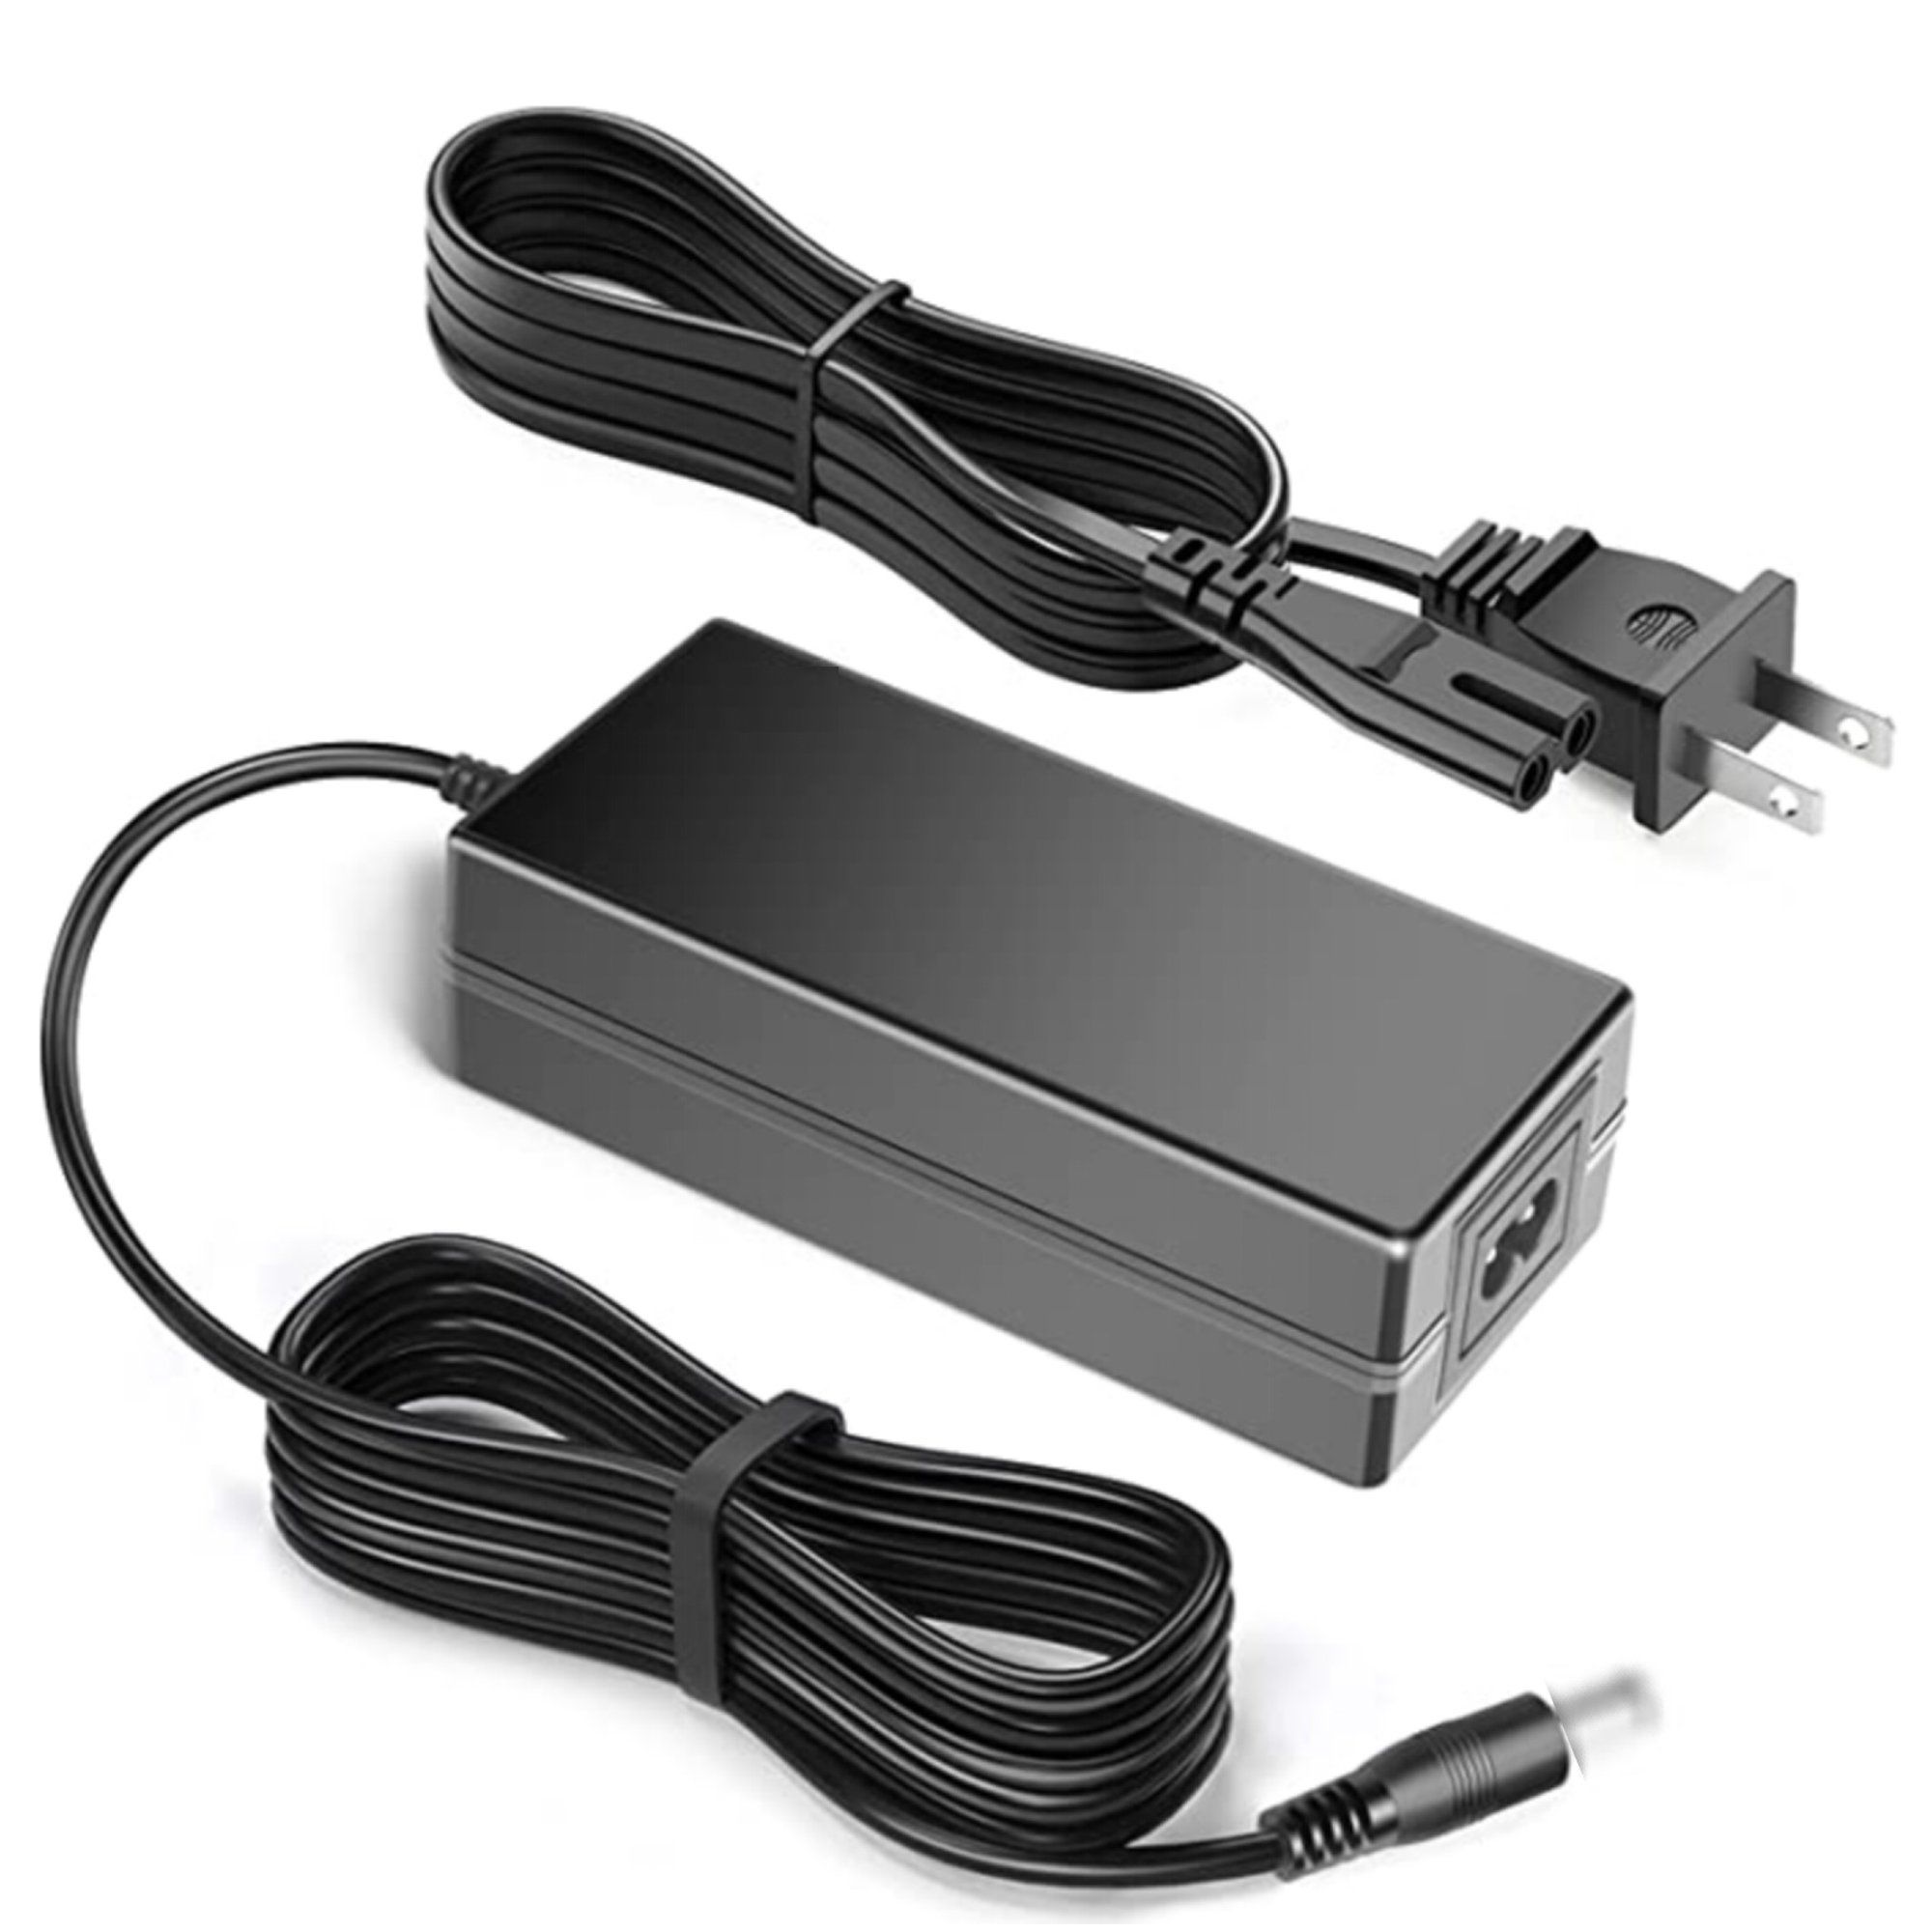 12V AC/DC Adapter For Cisco TelePresence SX20 Codec TTC7-21 CTS SX20N LITEON PWR-60W-AC PWR-60W-SX-AC Delta EADP-60KB B EADP-60KBB GPE GPE602-120500D GPE602-1205000 5A 60W Power - image 1 of 5